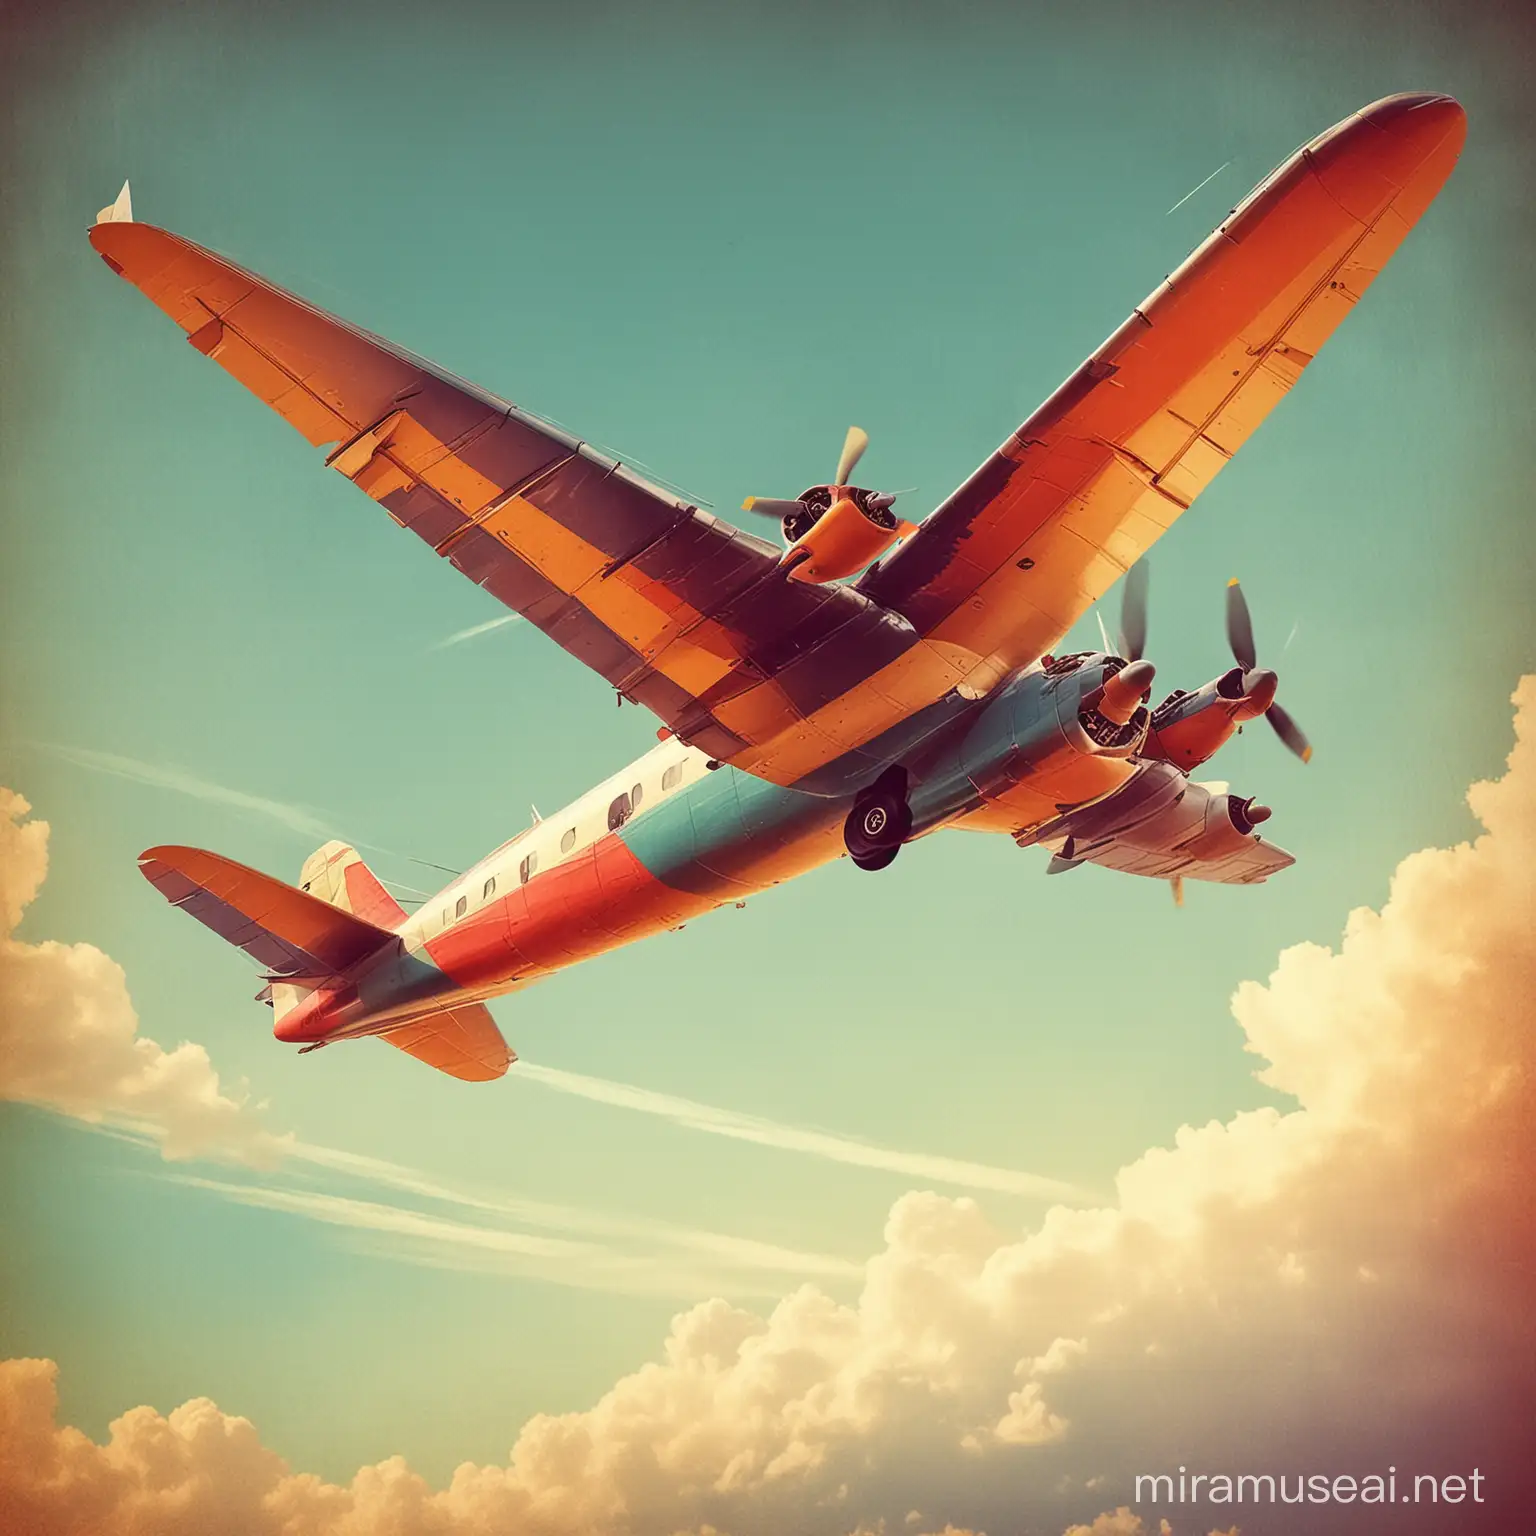 vintage poster style, airplane in flight, colorful